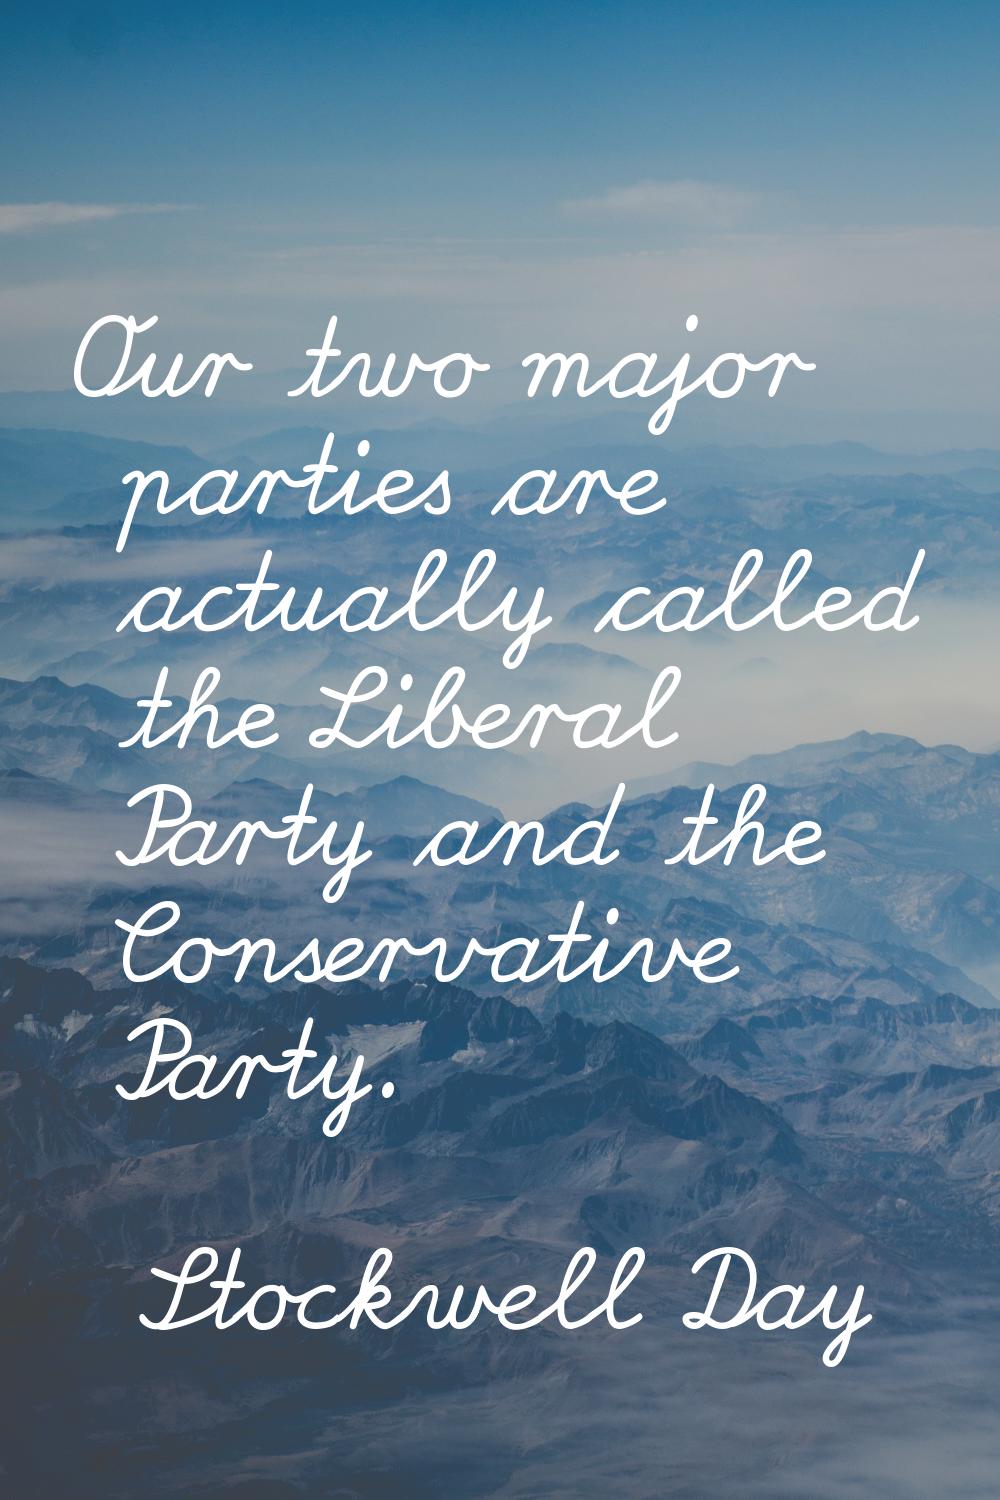 Our two major parties are actually called the Liberal Party and the Conservative Party.